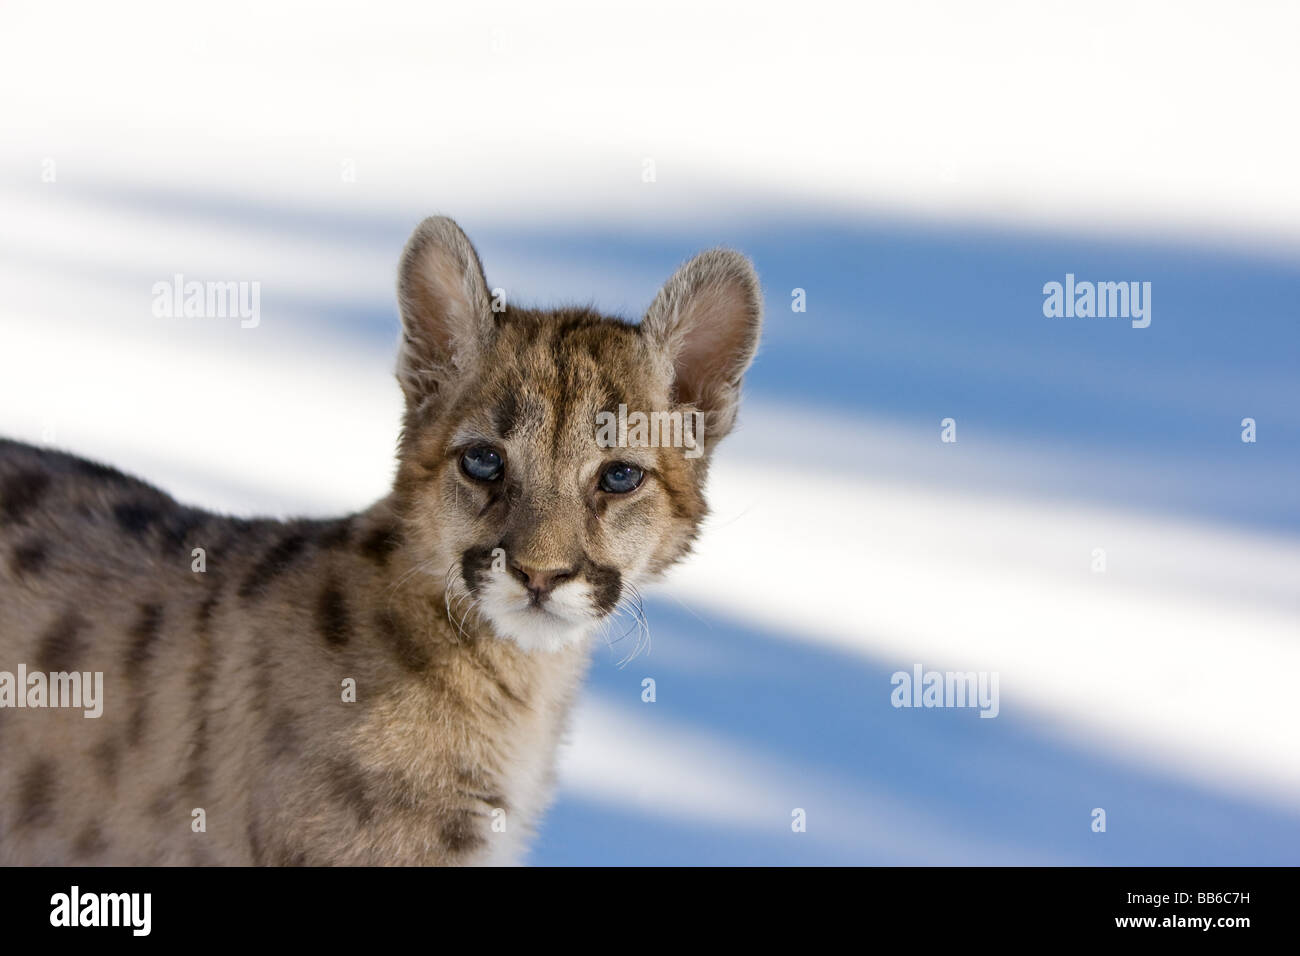 Young mountain lion, cougar, in snow Stock Photo